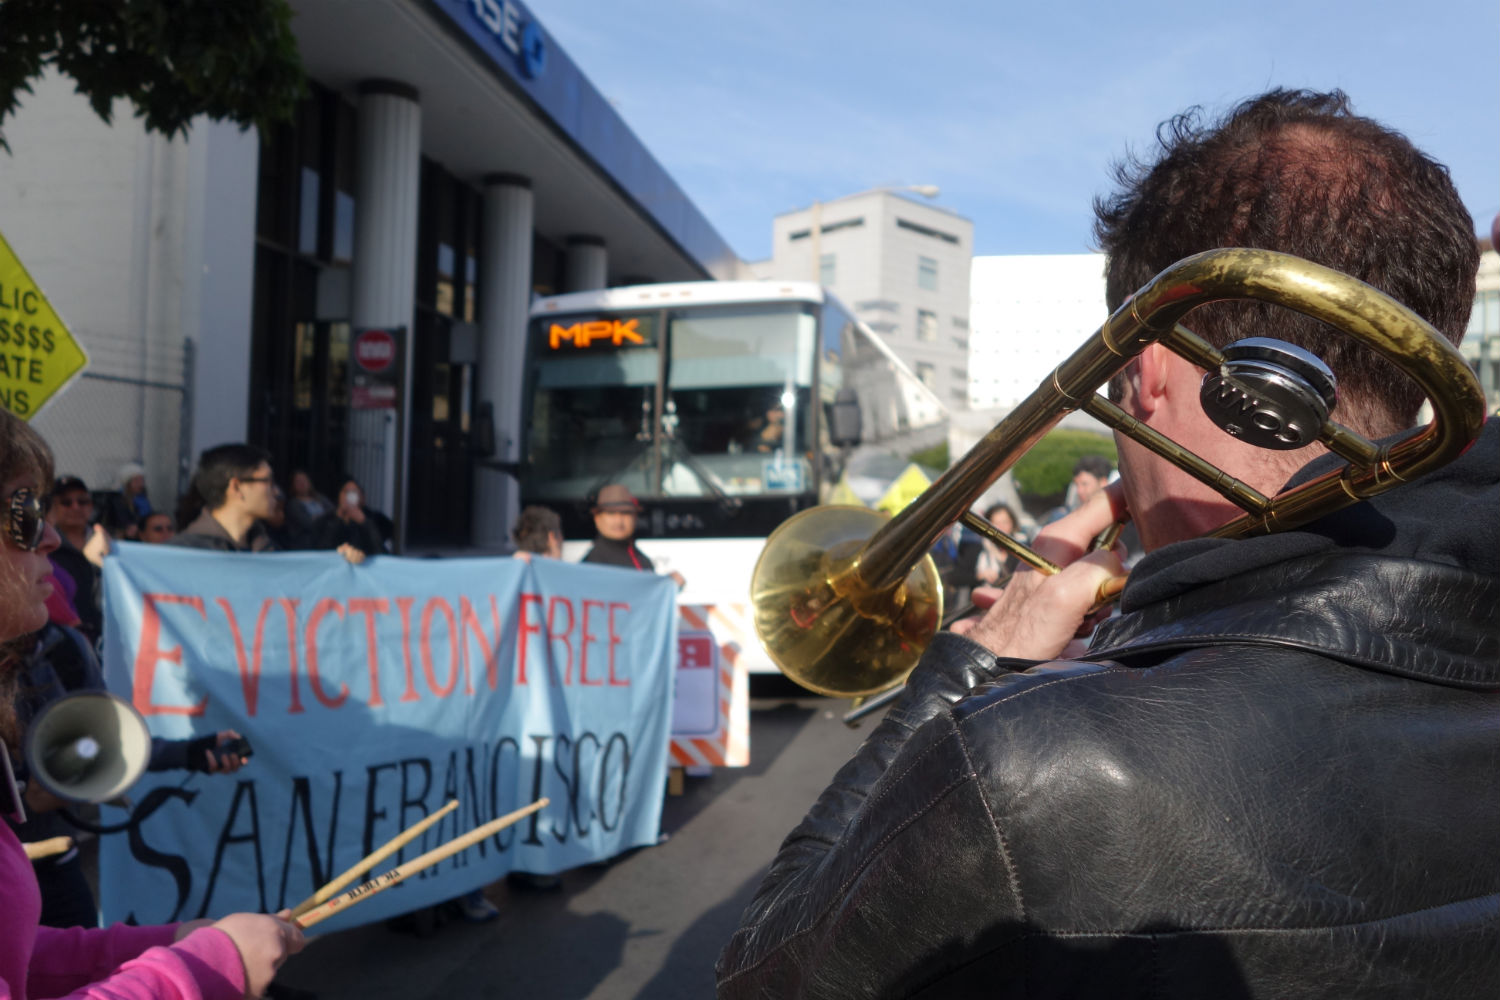 Anti-eviction protestors, including a band called the Brass Liberation Orchestra, block a private shuttle taking Facebook employees to the company headquarters in Menlo Park, Calif. on Jan. 21, 2013. (Katy Steinmetz / TIME)